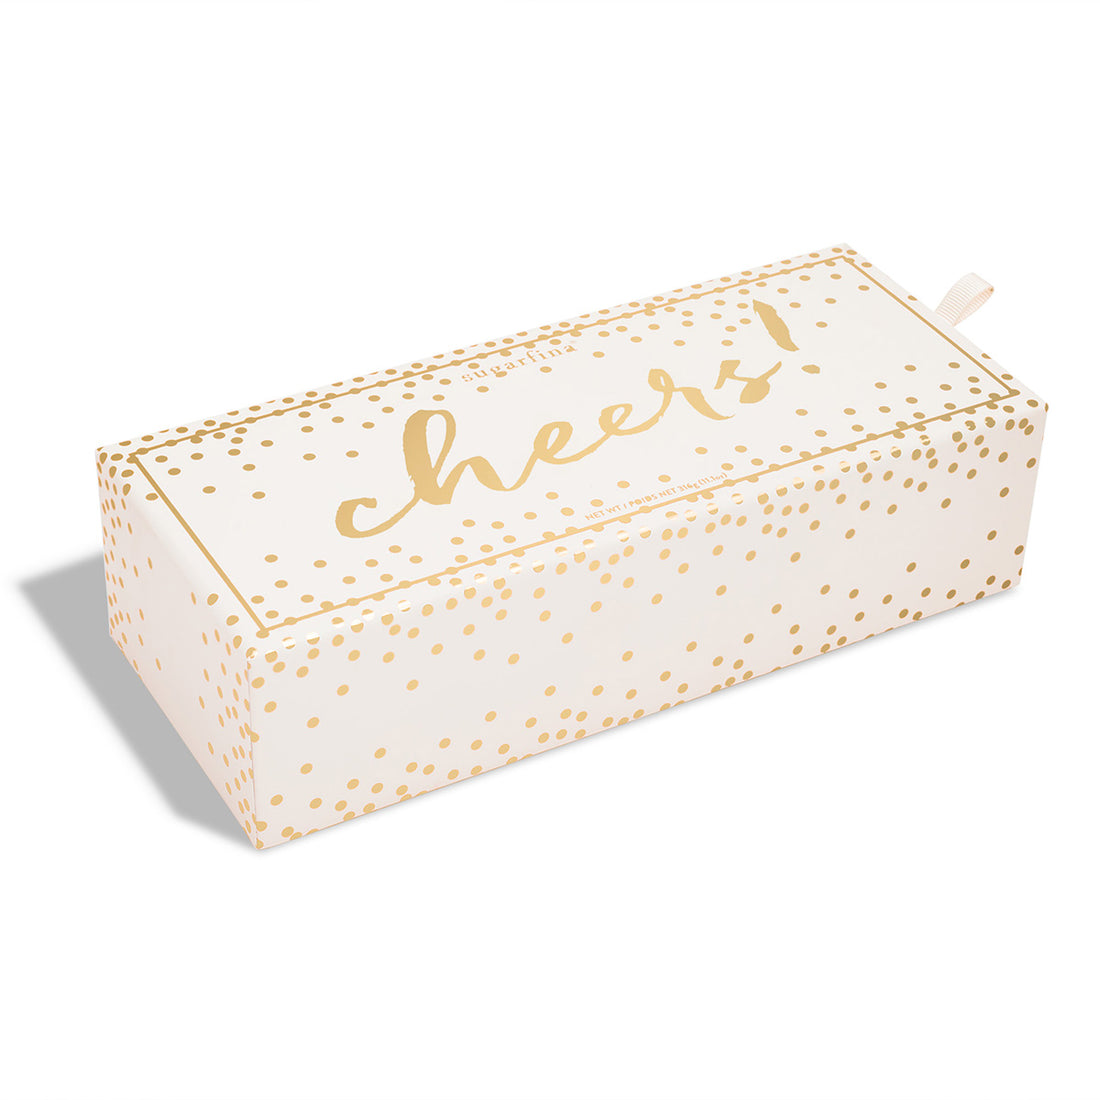 Spencer Gold Glitter Bento Box Container